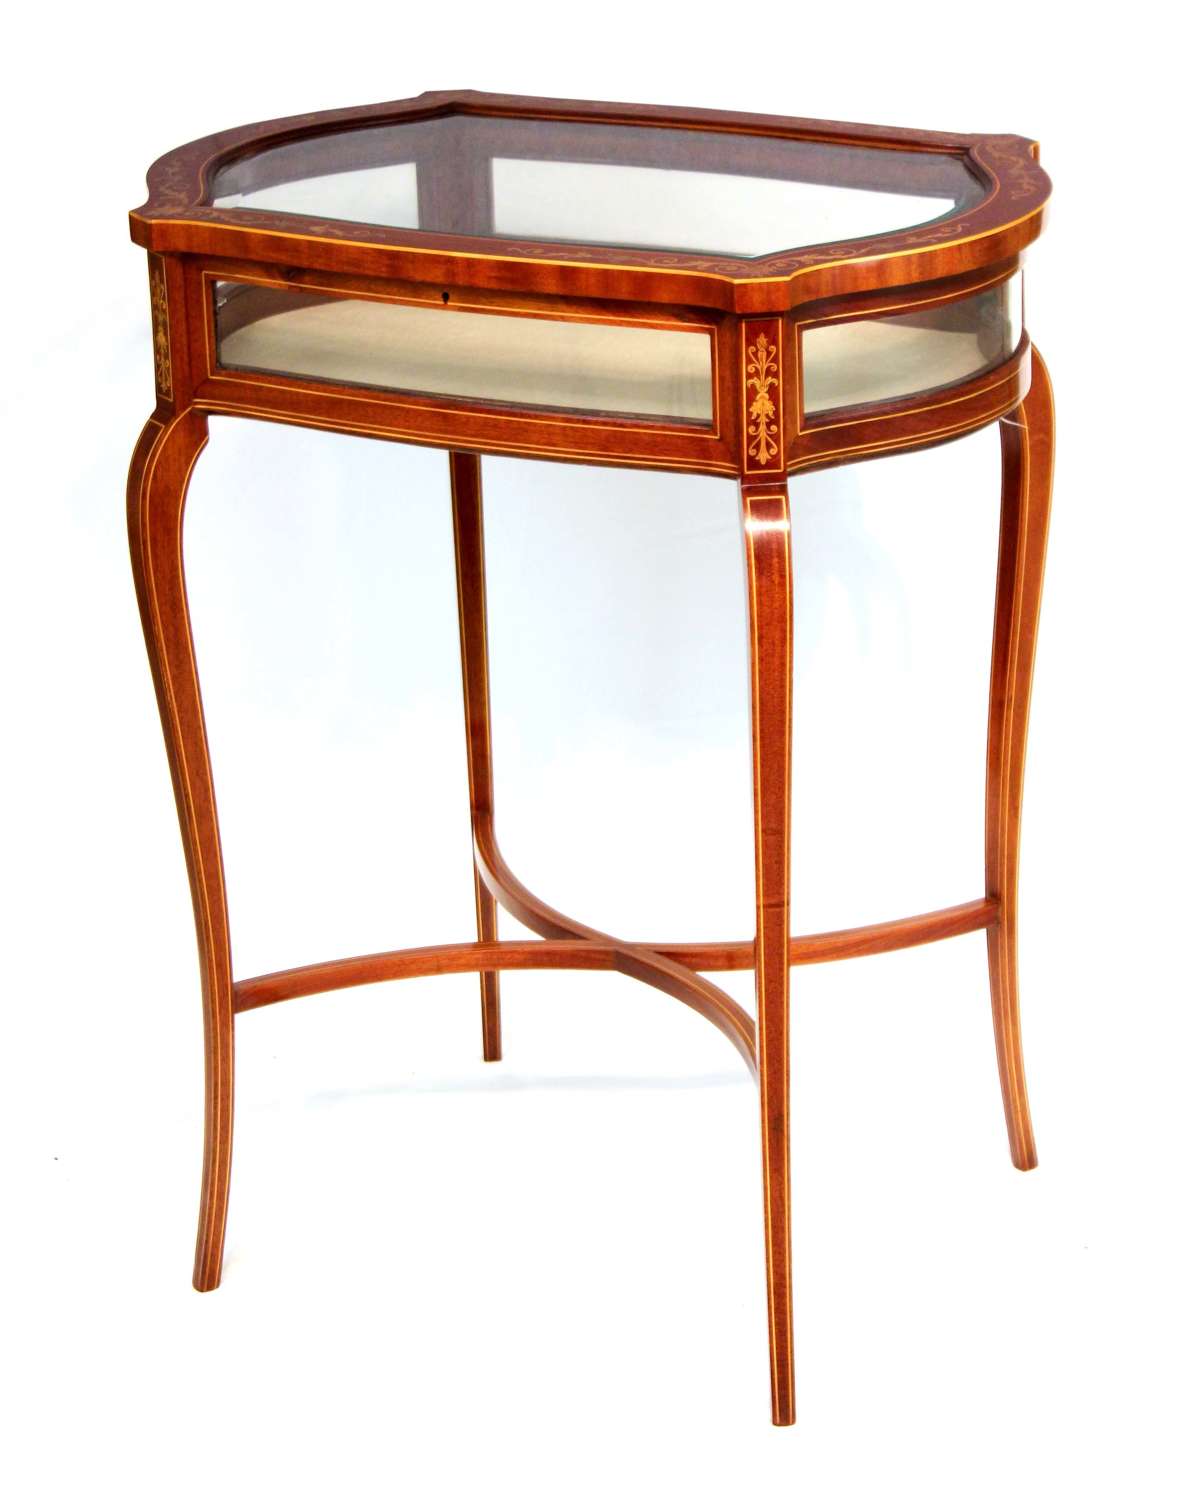 A Superb Late Victorian Mahogany Inlaid Bijouterie Table